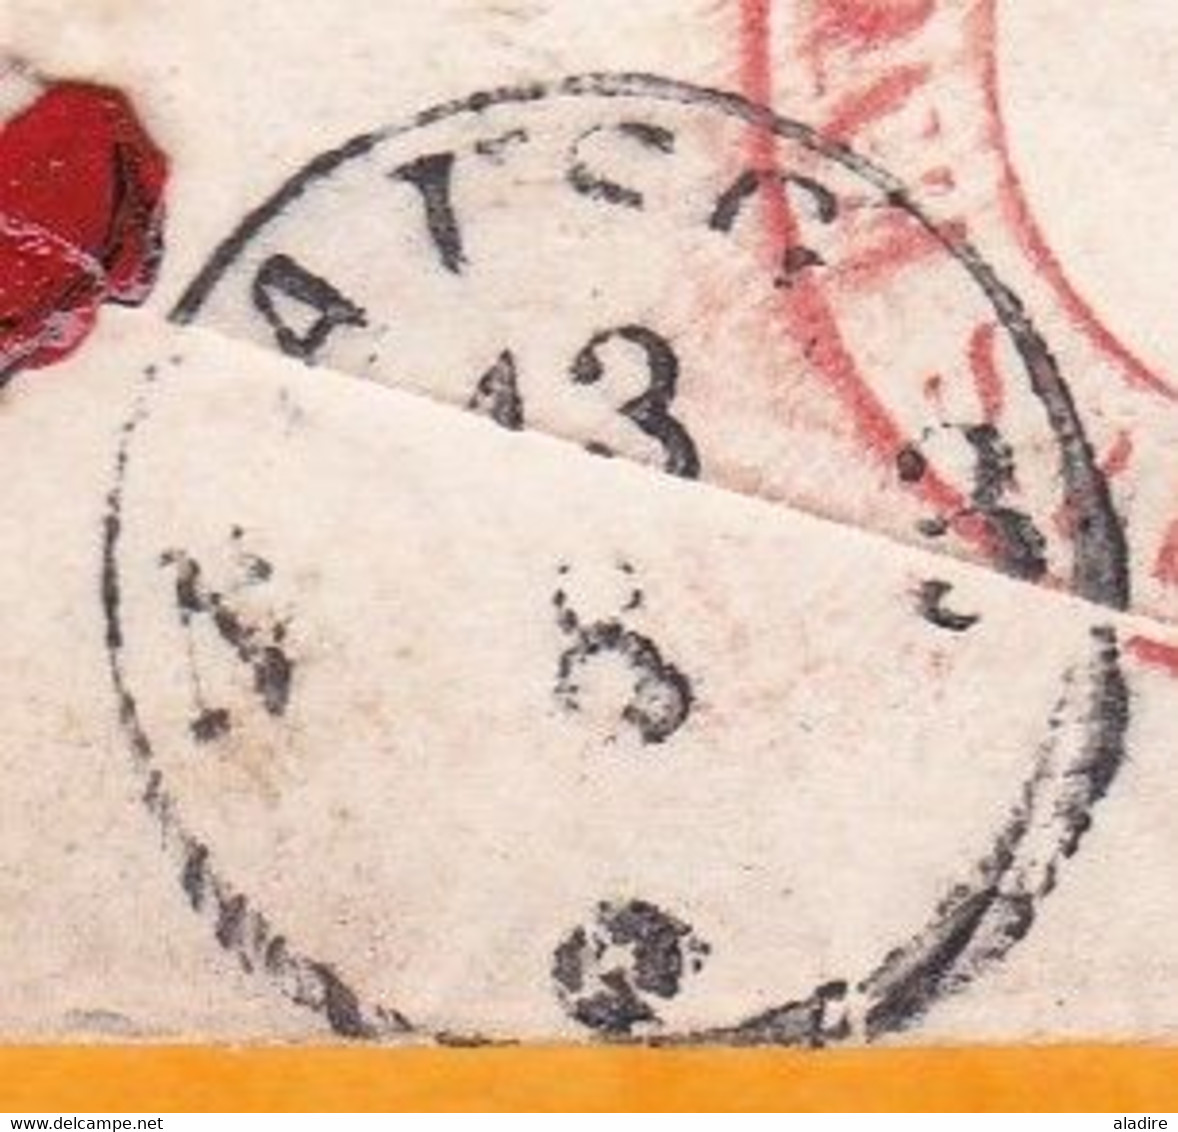 1852 - Prepaid Cover from Winchester, England to Aix la Chapelle Aachen, Germany and not France - transit cancel